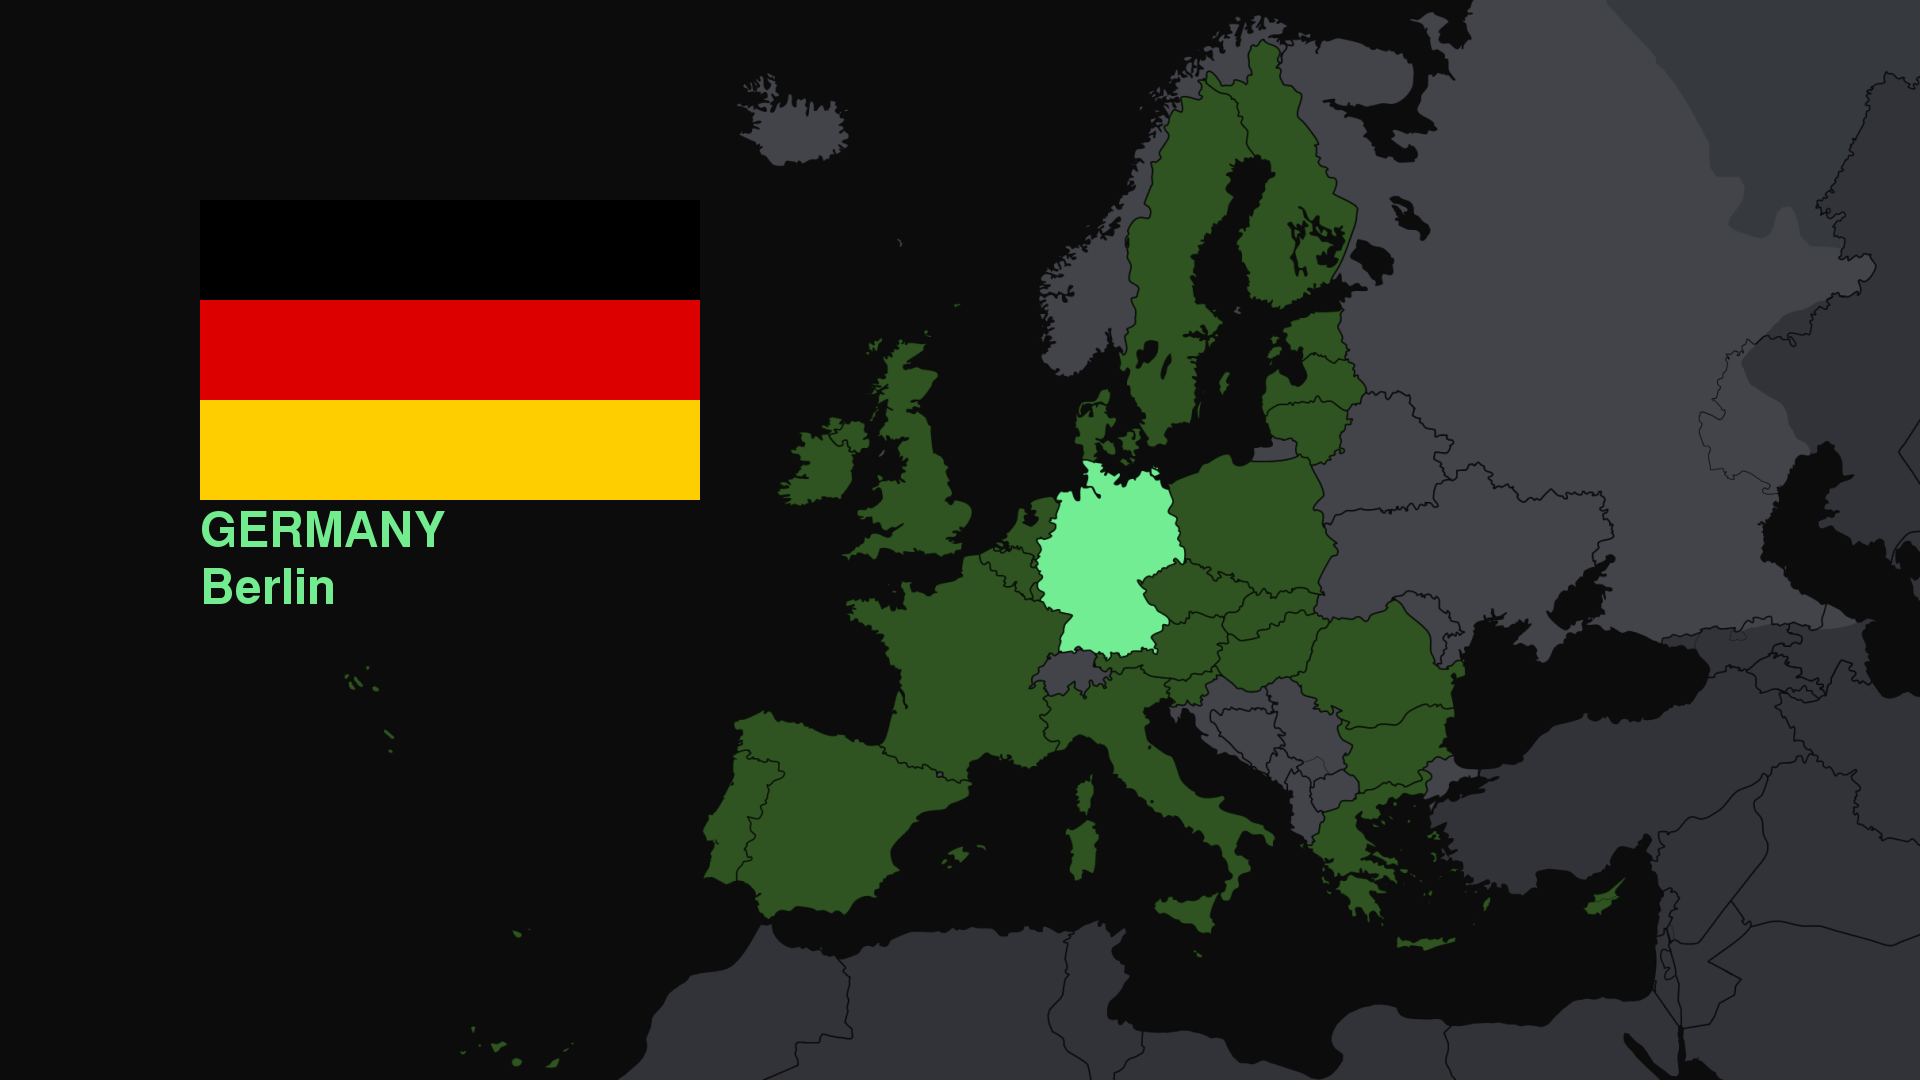 Wallpaper, Germany, map, flag, Europe 1920x1080